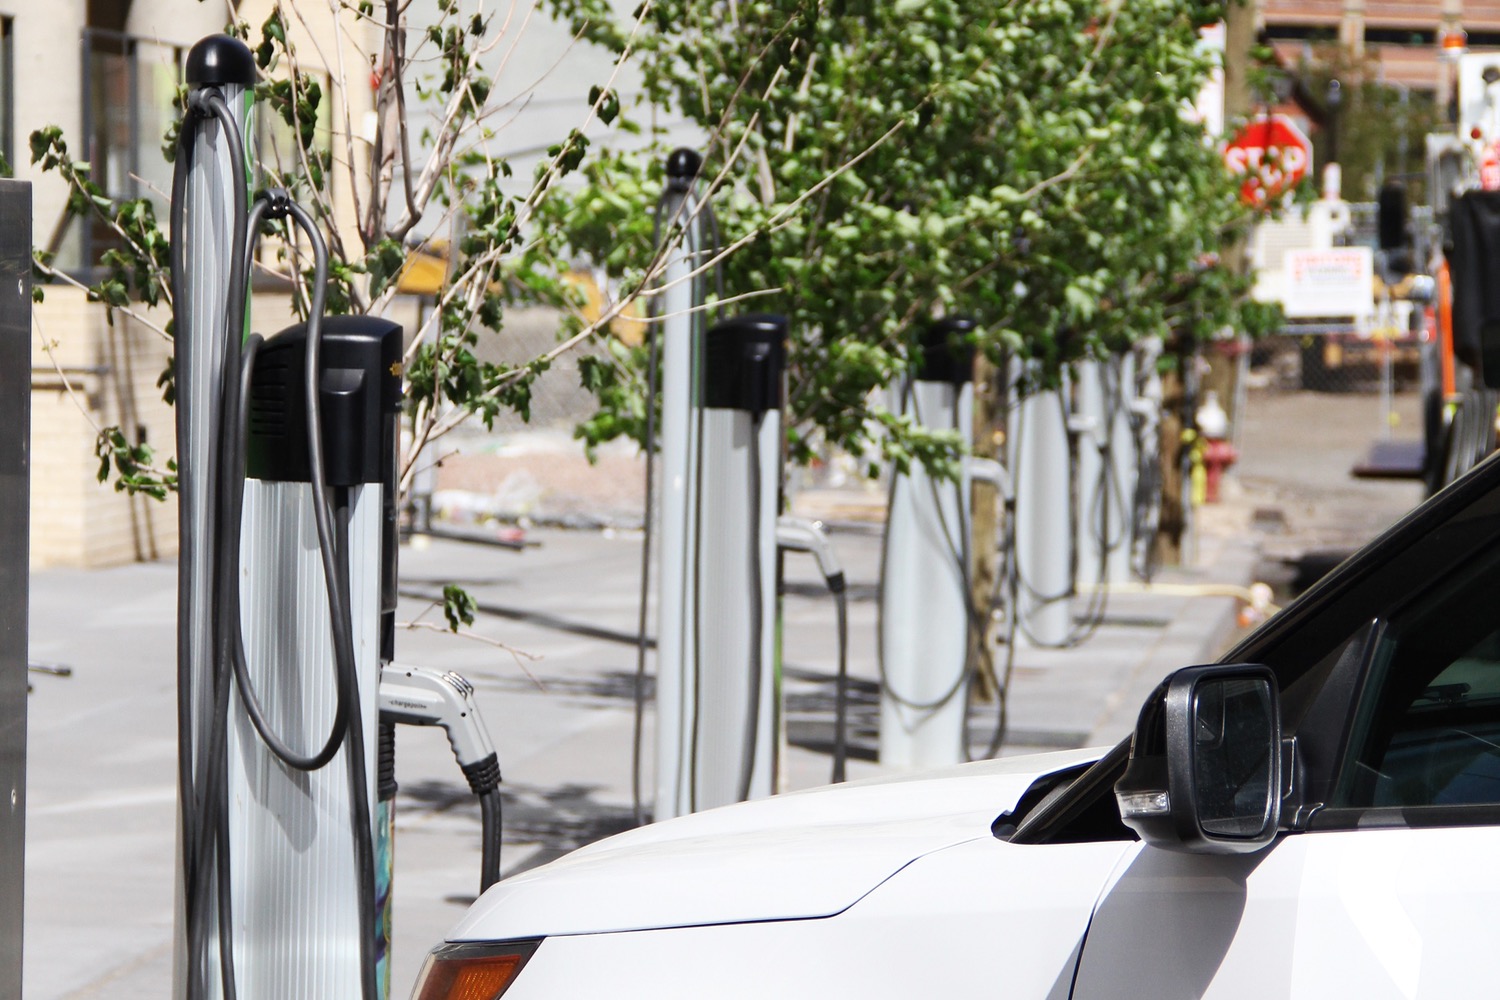 Curbside electriccar charging in Jersey City highlights importance for